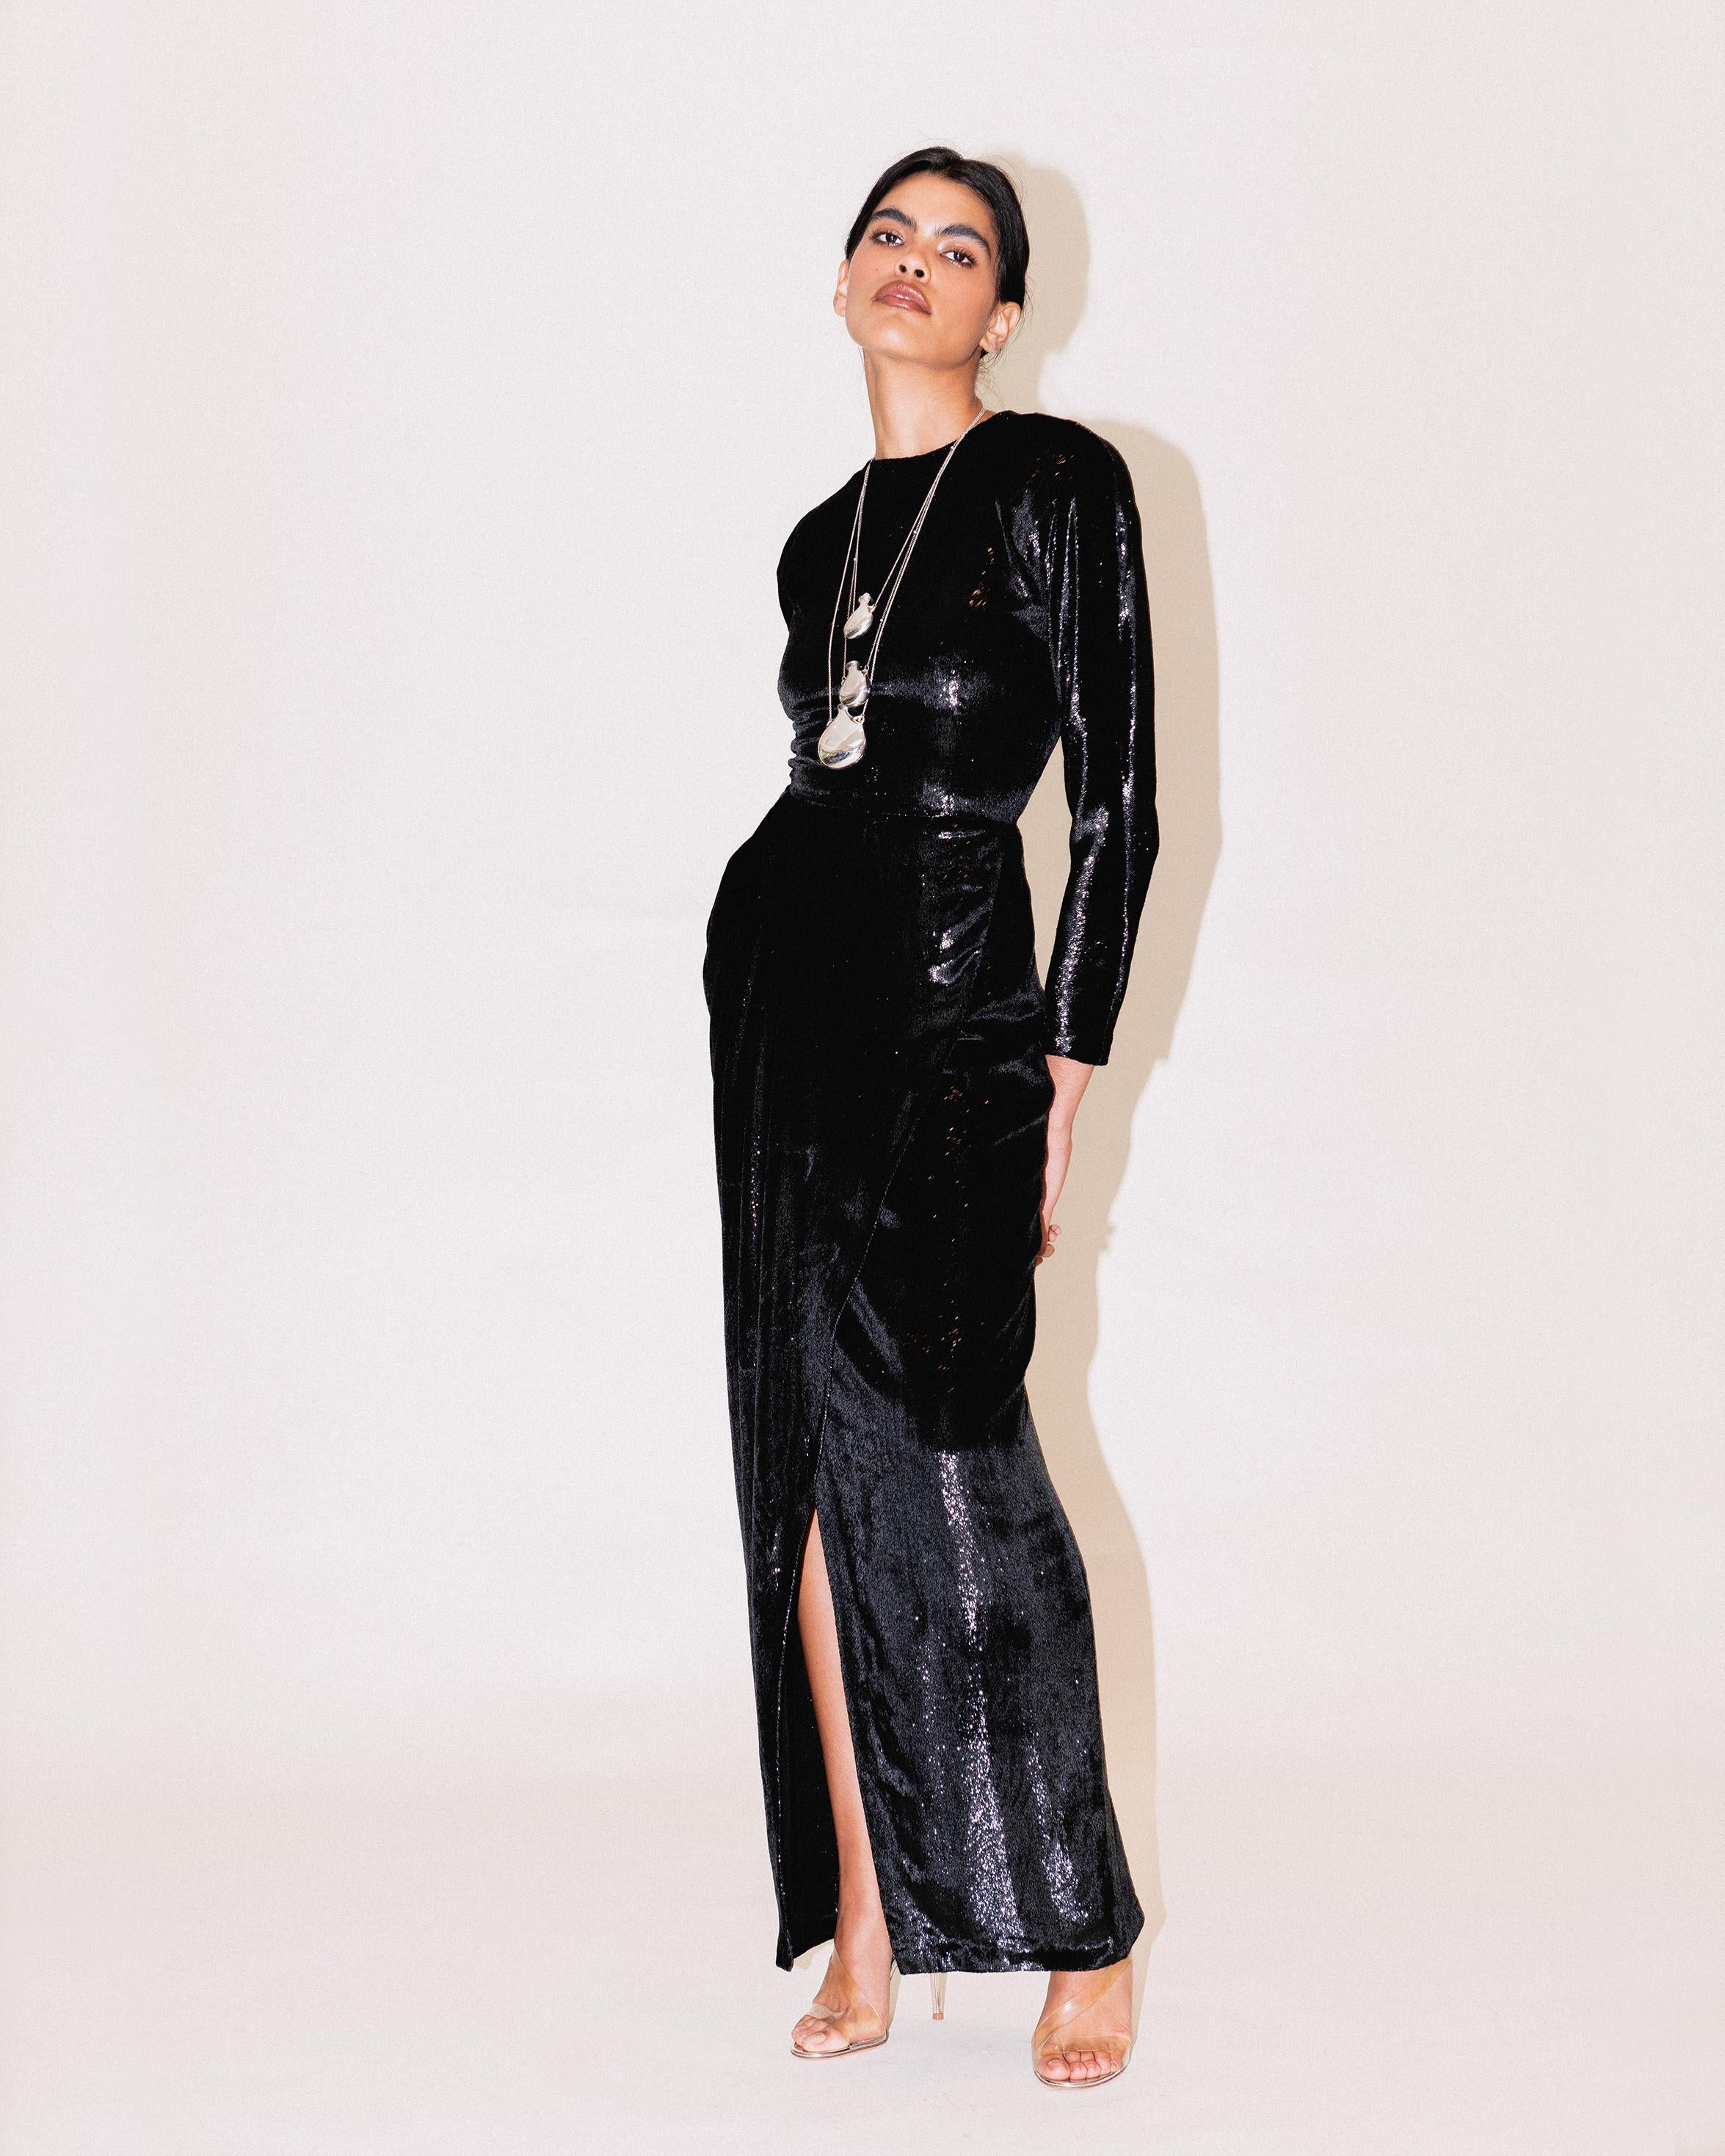 A/W 1989 Geoffrey Beene black lamé long sleeve gown. Silk and tinsel blend metallic lamé velvet gown with long sleeves and built-in shoulder pads (removable as desired). Fitted waist and open asymmetrical drape wrap front with side slit. Concealed